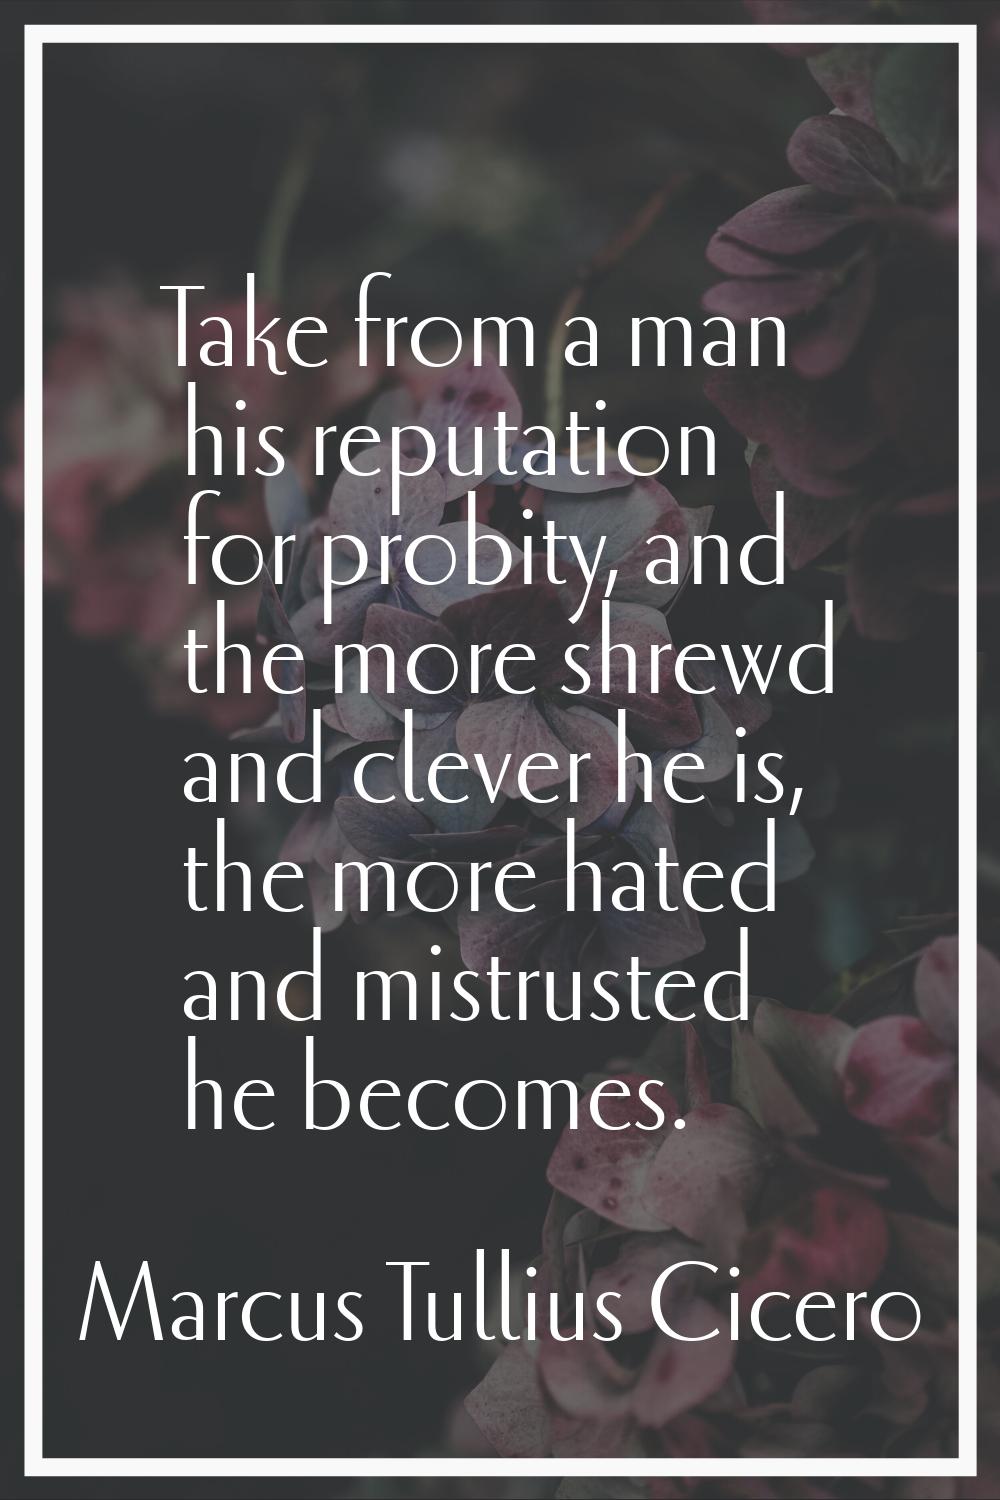 Take from a man his reputation for probity, and the more shrewd and clever he is, the more hated an